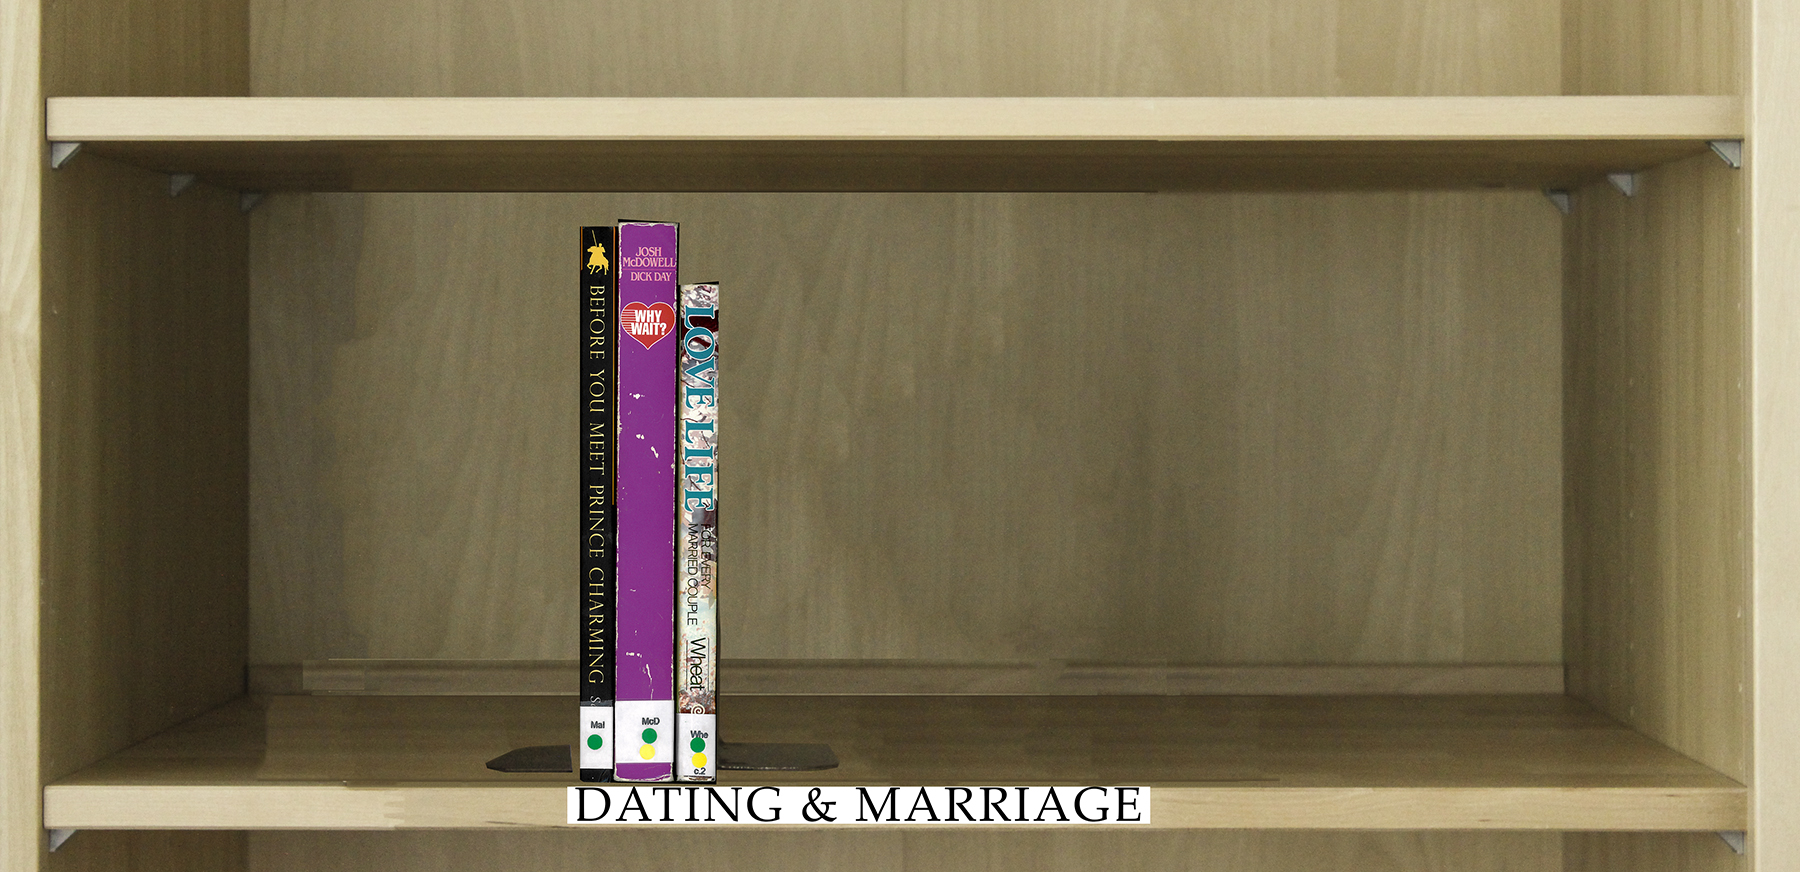 Index of Books Under the Category Dating & Marriage.